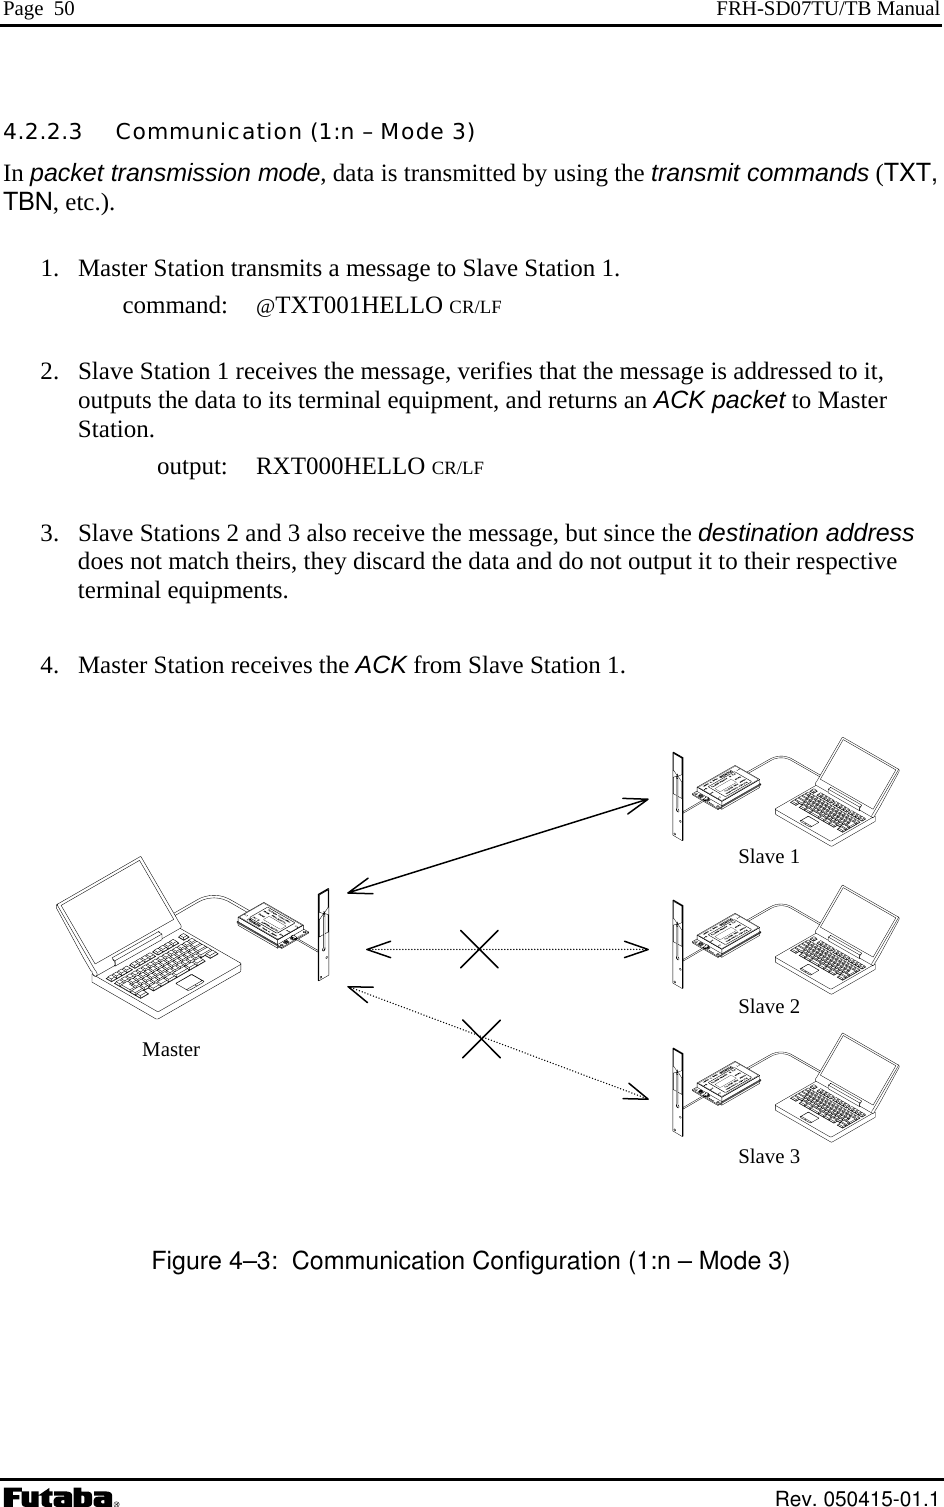 Page  50  FRH-SD07TU/TB Manual 4.2.2.3   Communication (1:n – Mode 3) In packet transmission mode, data is transmitted by using the transmit commands (TXT, TBN, etc.).   1.  Master Station transmits a message to Slave Station 1.  command: @TXT001HELLO CR/LF   2.  Slave Station 1 receives the message, verifies that the message is addressed to it, outputs the data to its terminal equipment, and returns an ACK packet to Master Station.  output: RXT000HELLO CR/LF   3.  Slave Stations 2 and 3 also receive the message, but since the destination address does not match theirs, they discard the data and do not output it to their respective terminal equipments.   4.  Master Station receives the ACK from Slave Station 1.                                                         Slave 1 Slave 2 Slave 3 Master     Figure 4–3:  Communication Configuration (1:n – Mode 3)  Rev. 050415-01.1 